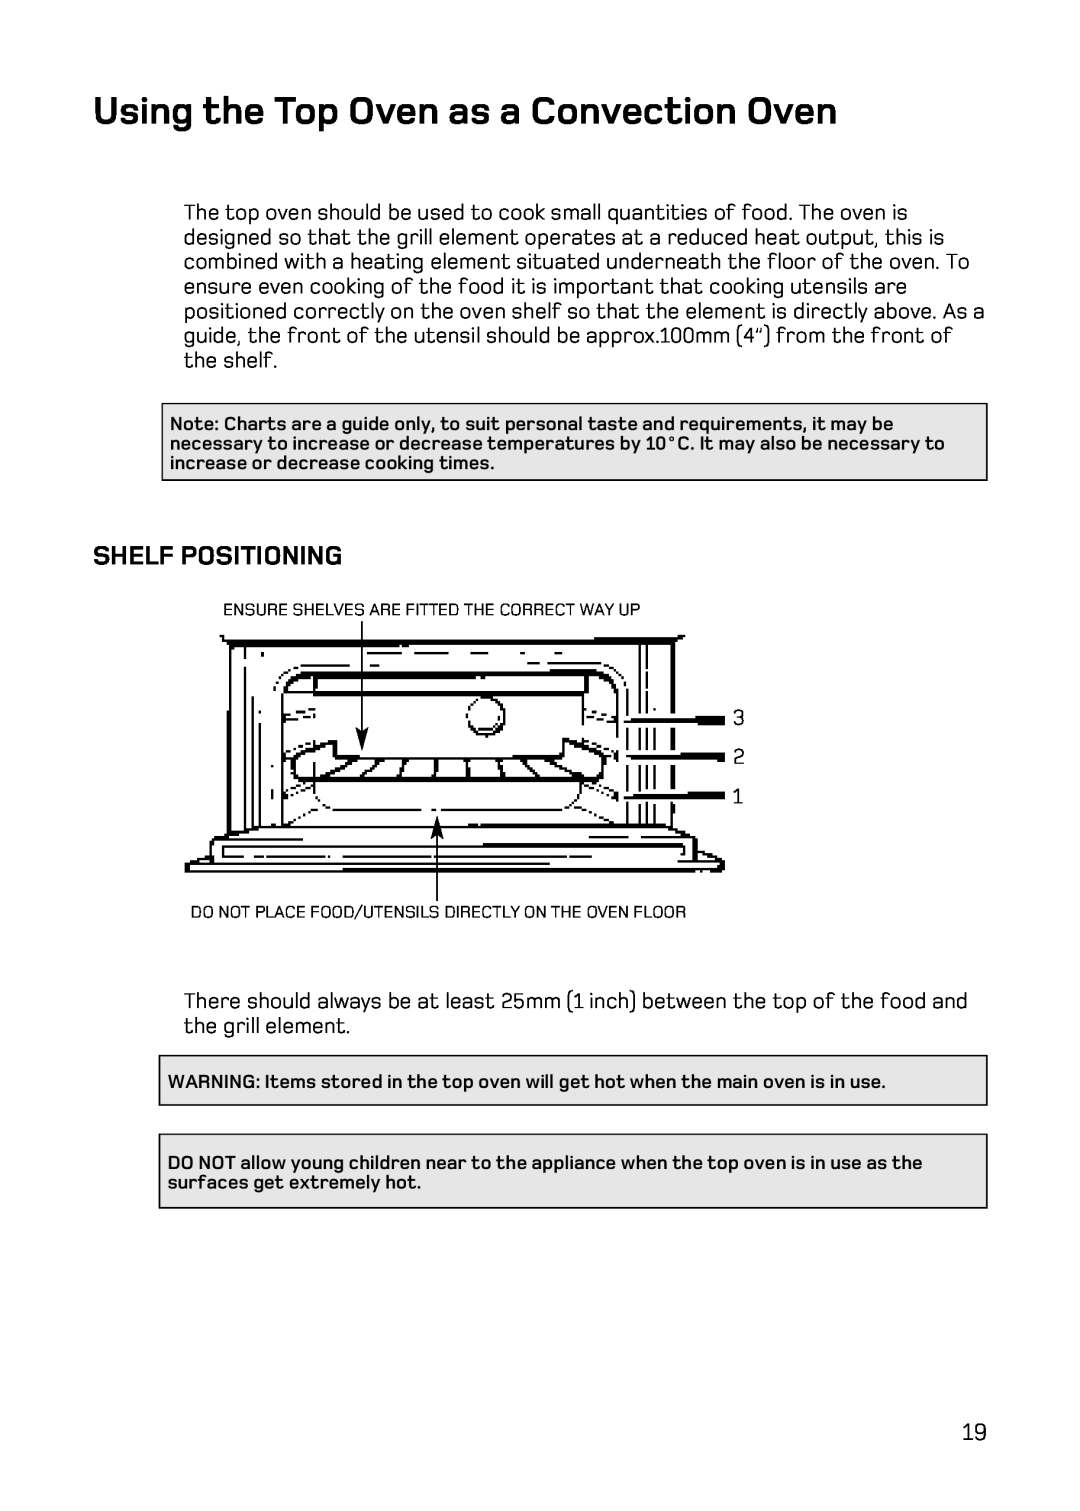 Hotpoint UE47, UQ47 manual Using the Top Oven as a Convection Oven, Shelf Positioning 